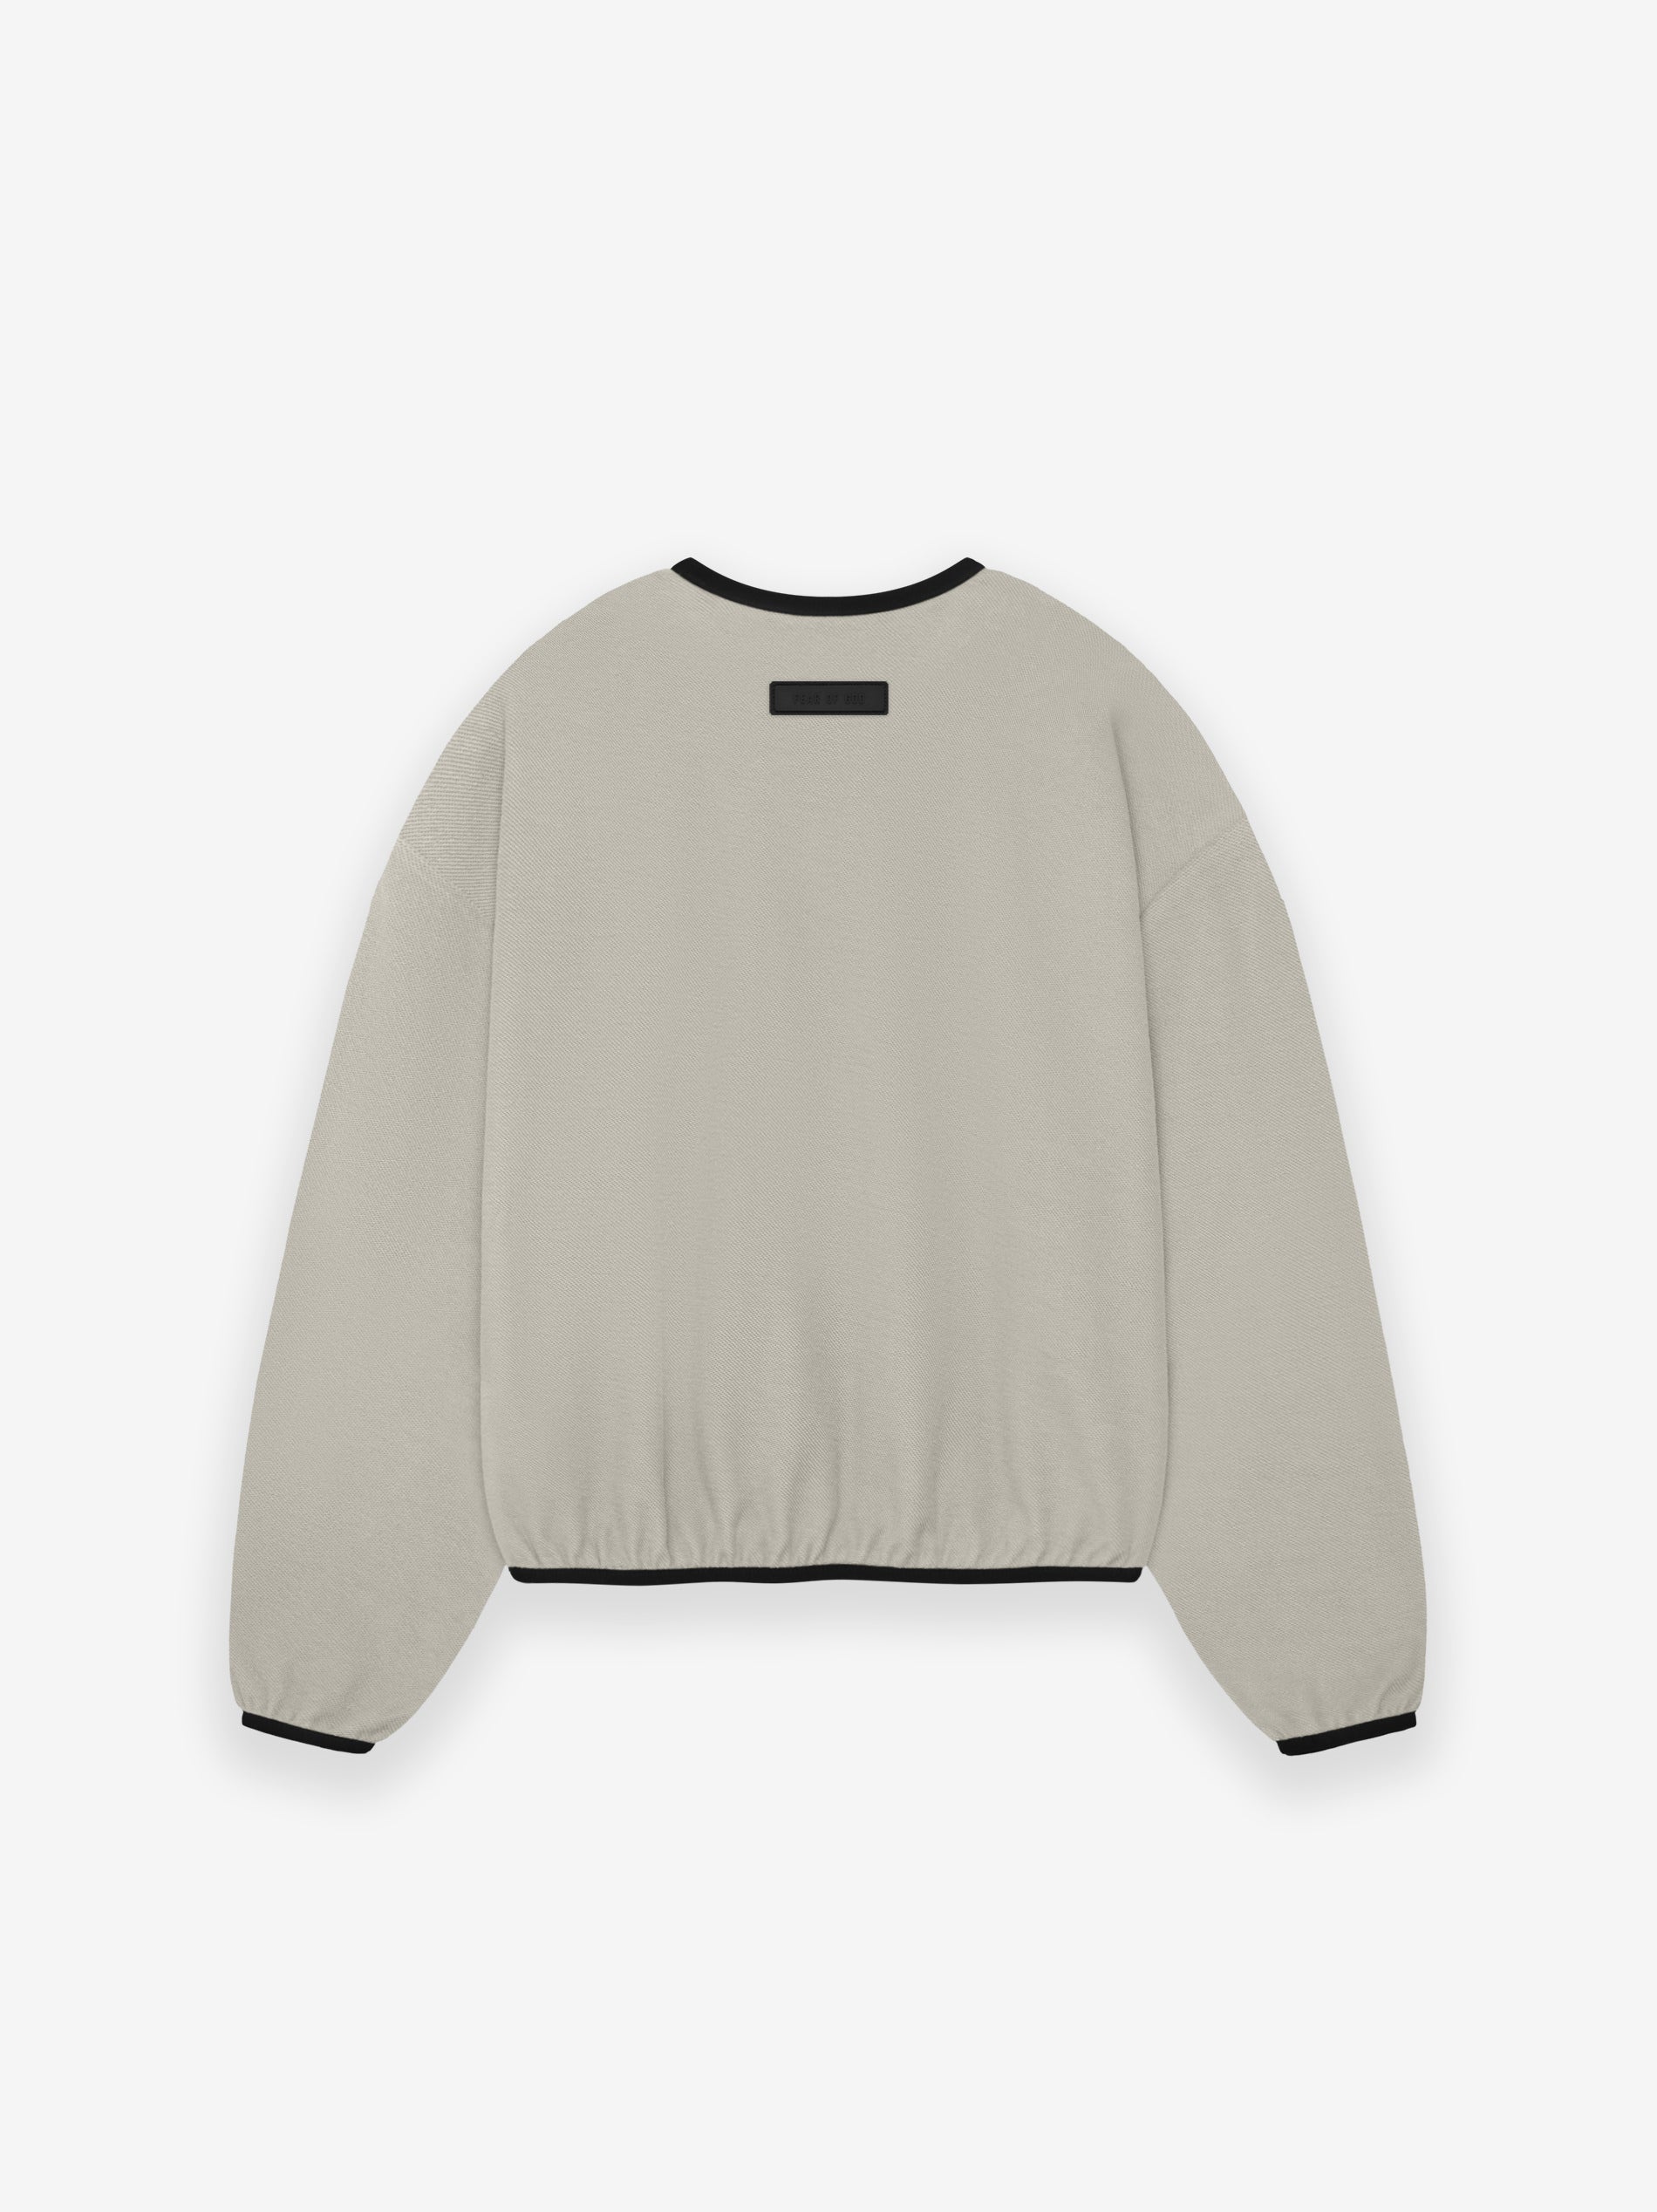 ESSENTIALS Womens Crewneck Sweater in Seal | Fear of God